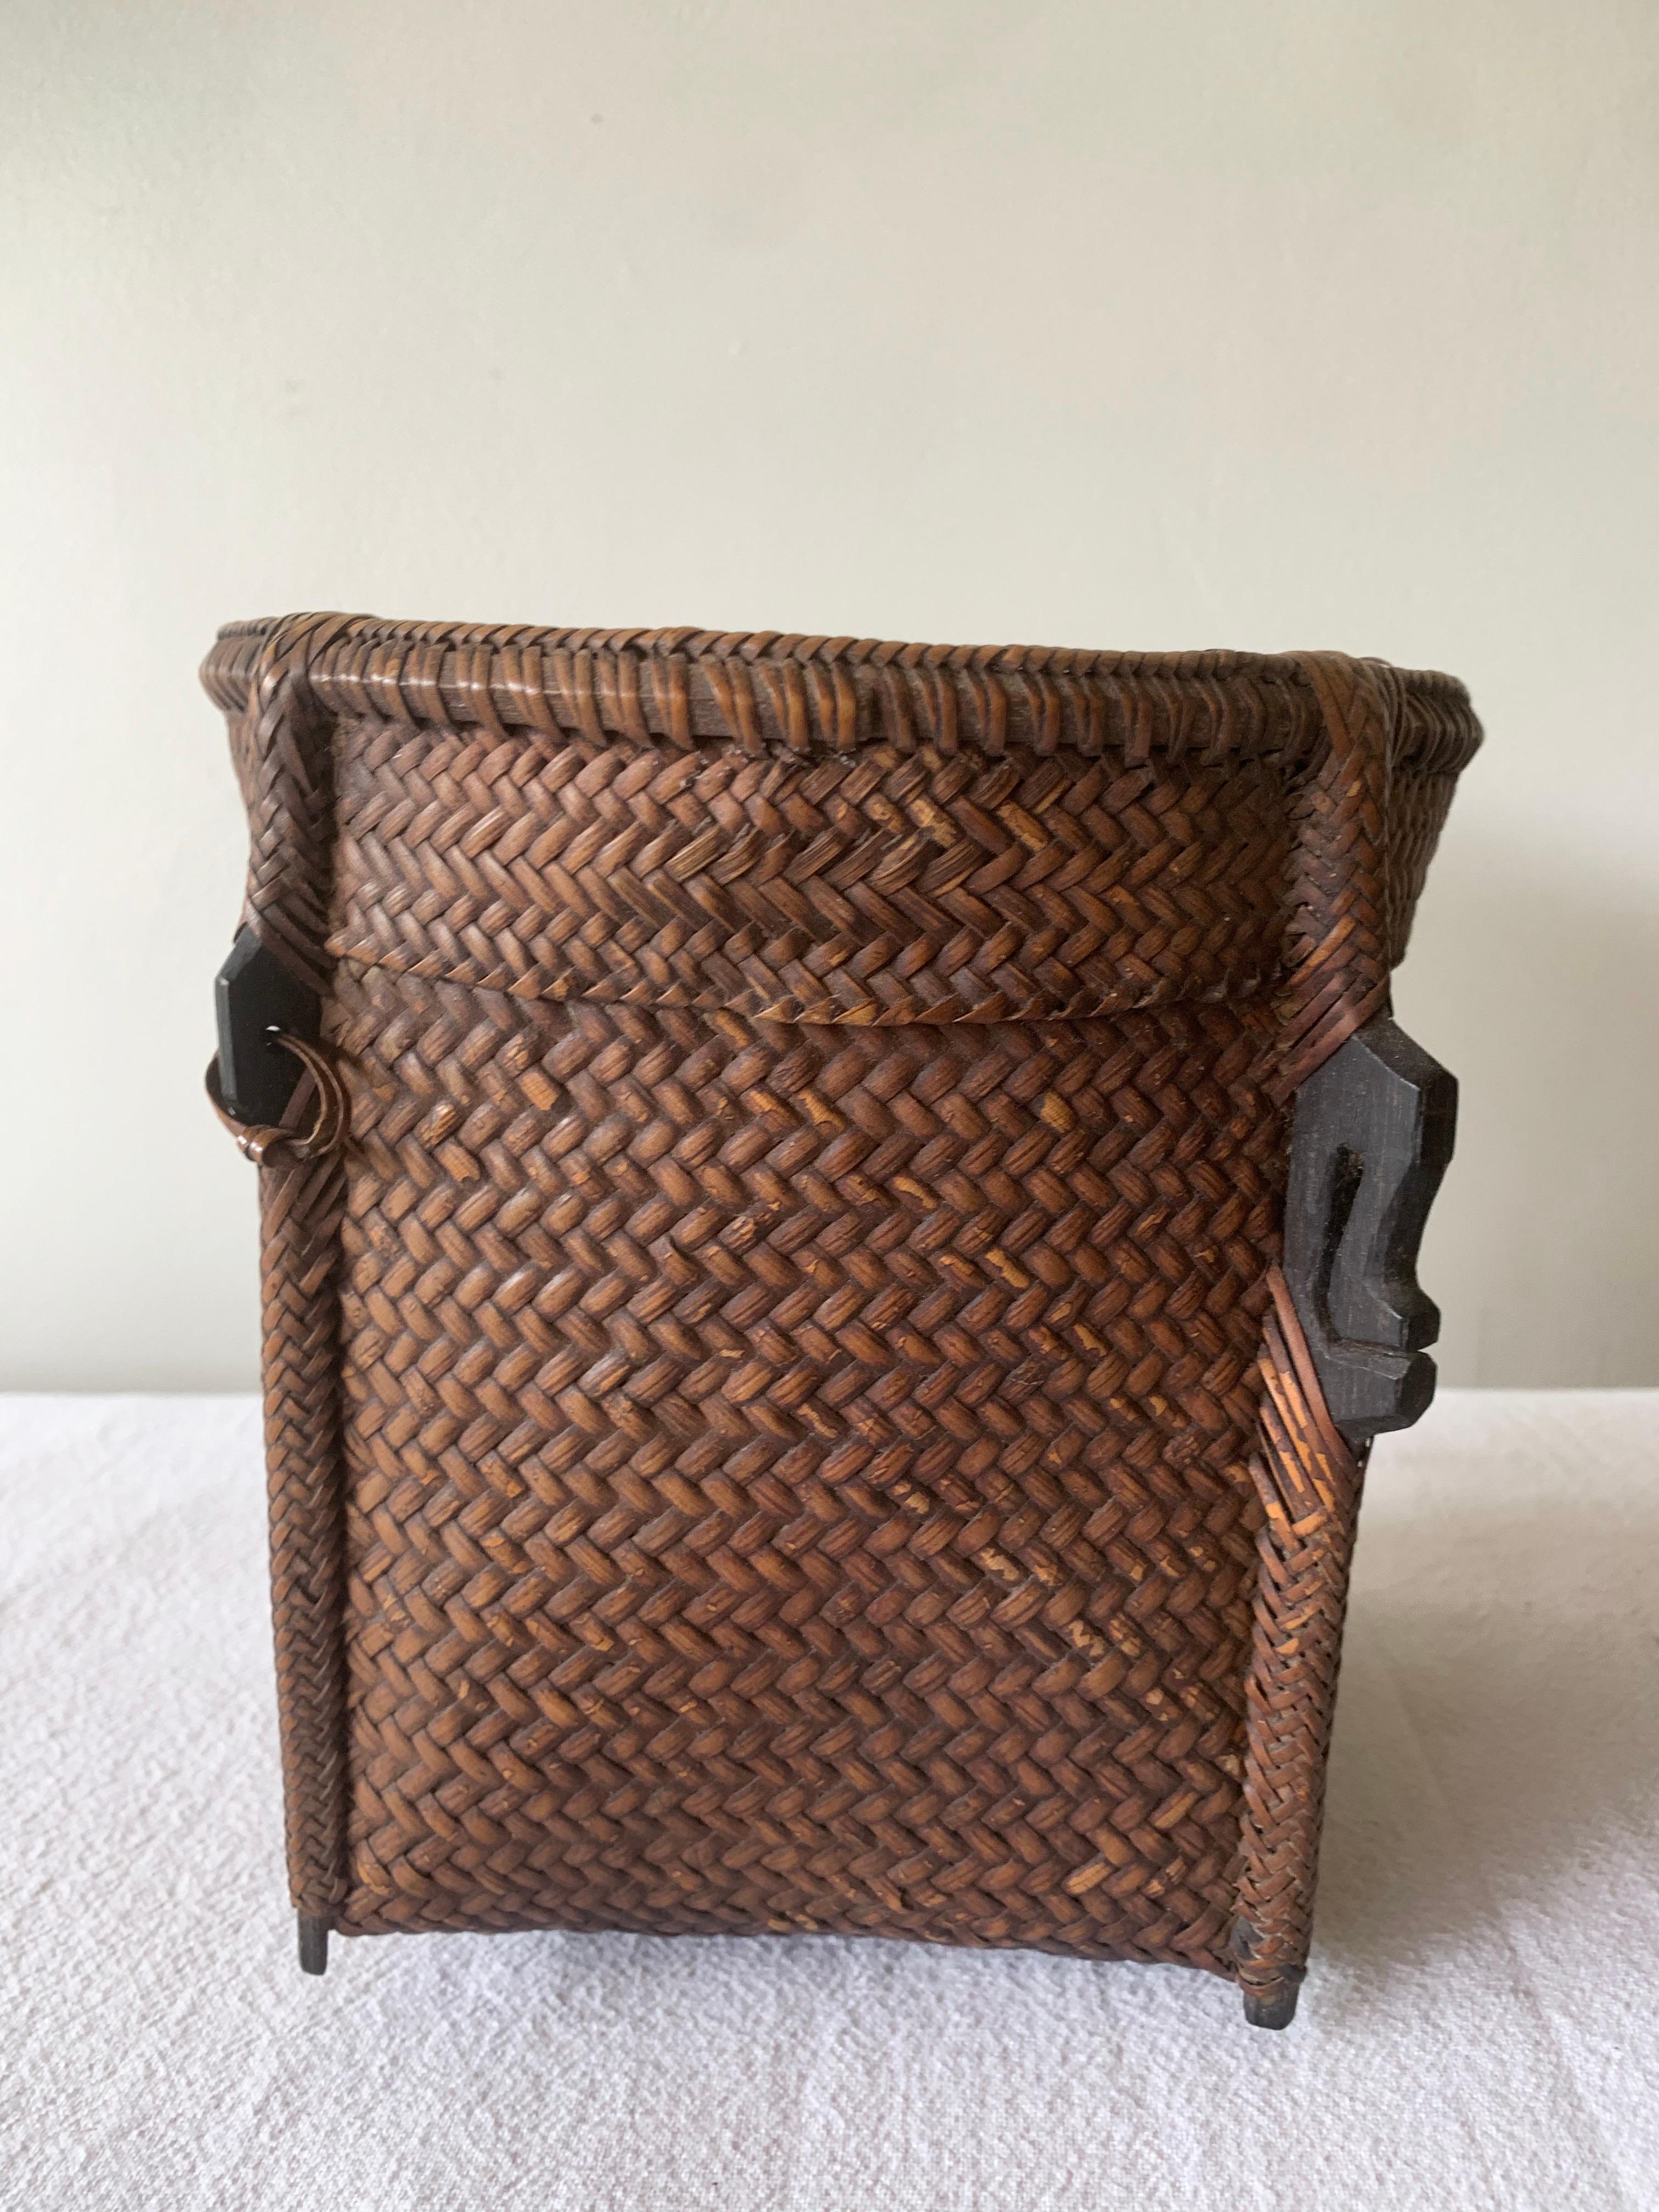 Indonesian Rattan Basket Dayak Tribe Hand-Woven from Kalimantan, Borneo, Mid 20th Century For Sale